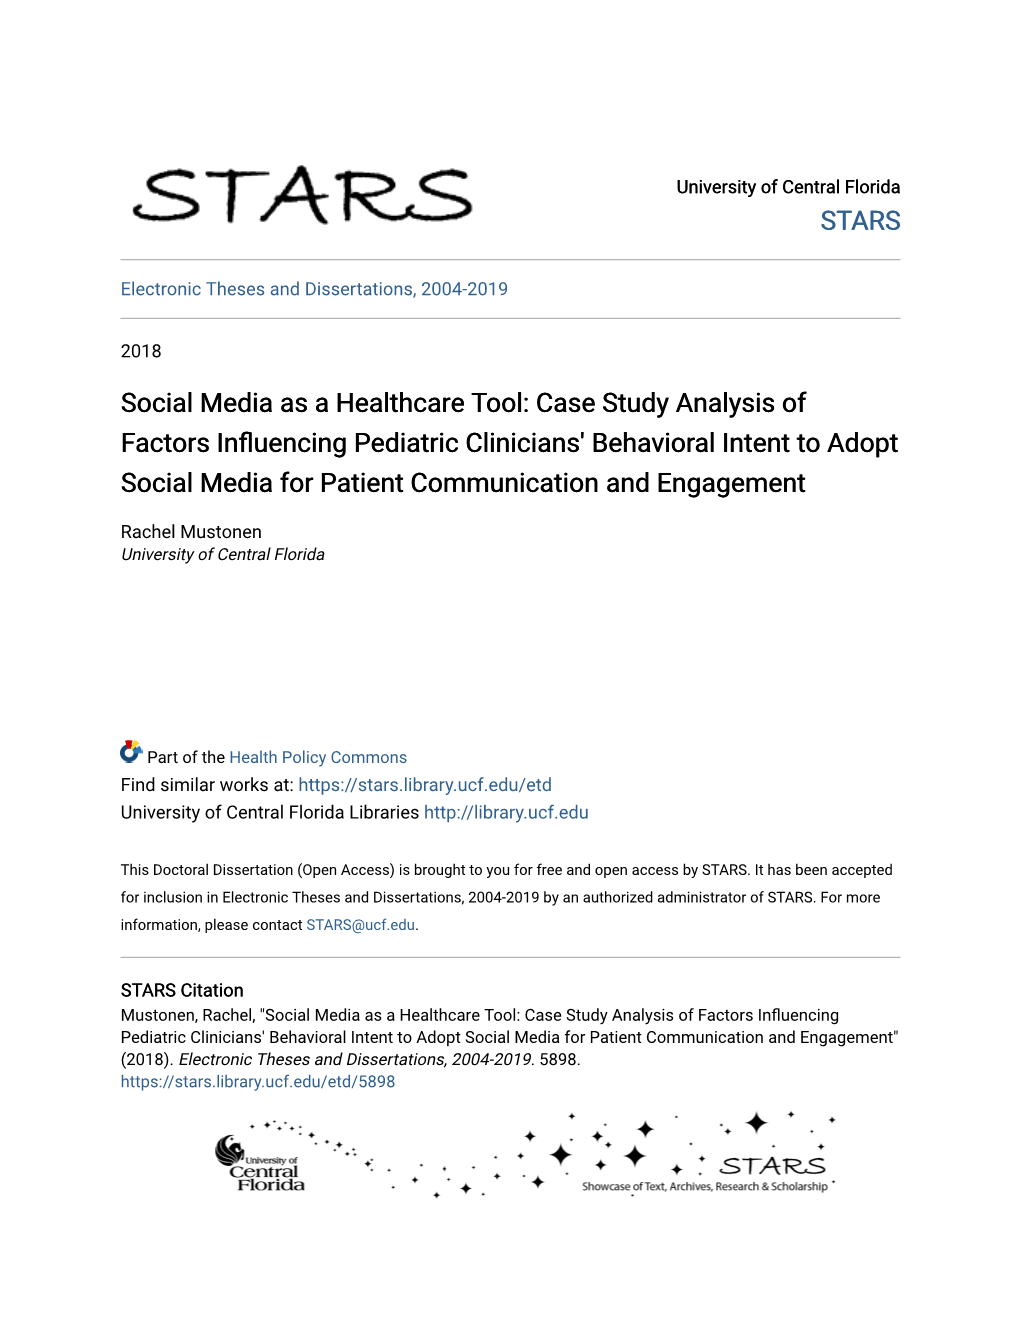 Social Media As a Healthcare Tool: Case Study Analysis of Factors